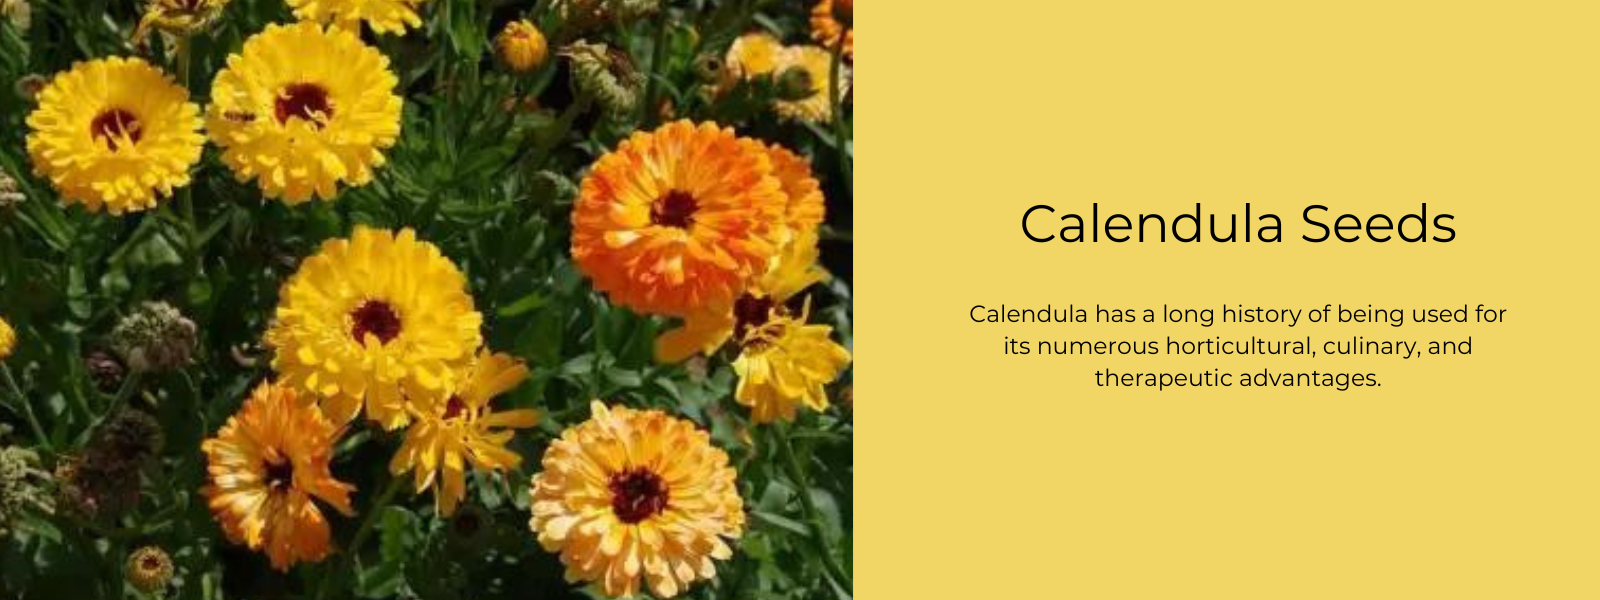 Calendula Seeds - Health Benefits, Uses and Important Facts